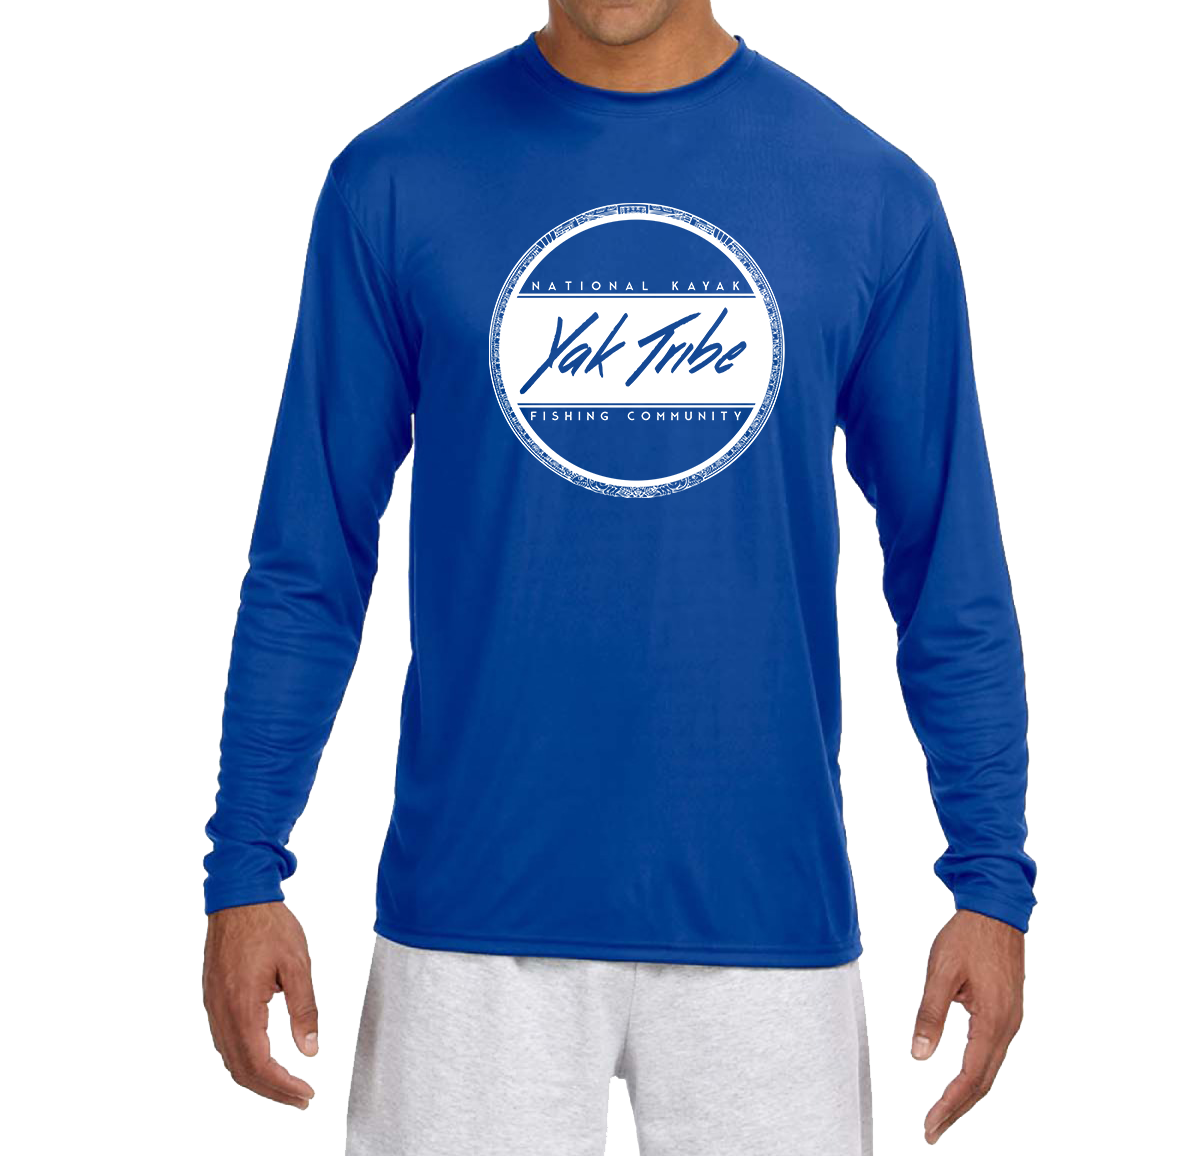 https://www.yak-tribe.com/wp-content/uploads/White-Seal-Long-Sleeve-Royal-Blue.png